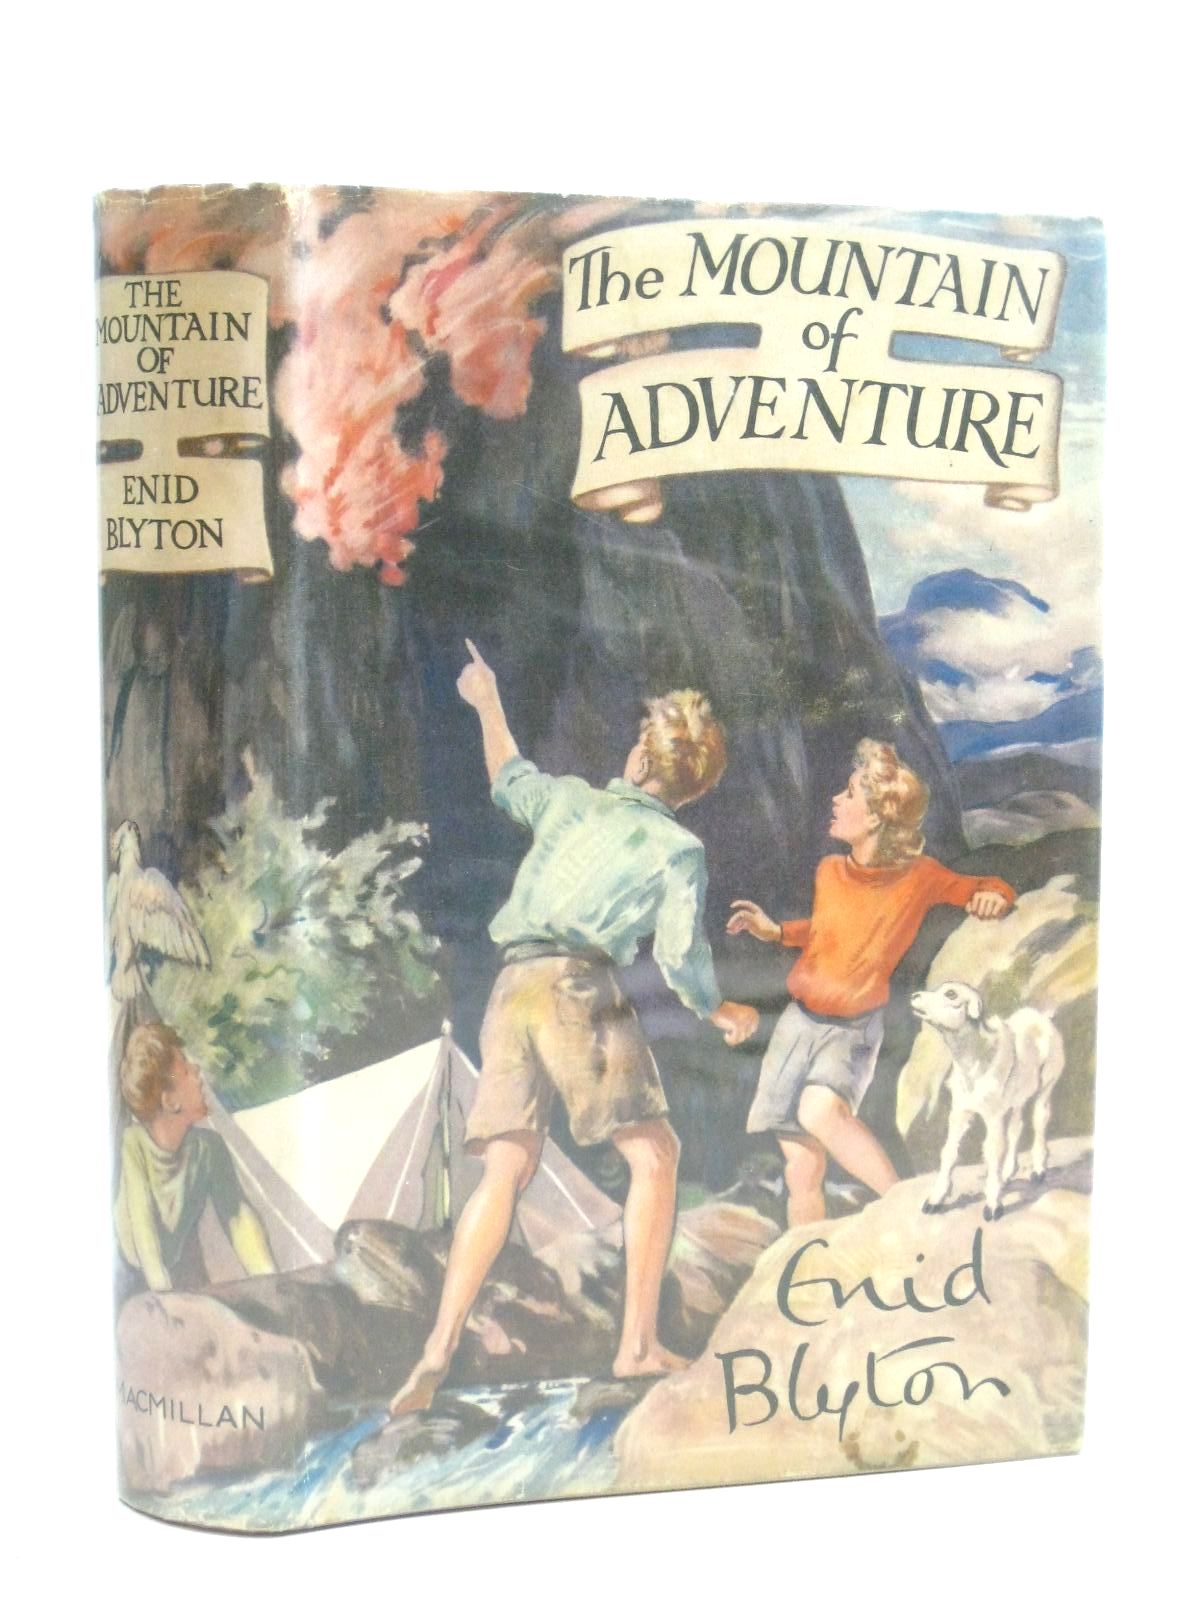 Cover of THE MOUNTAIN OF ADVENTURE by Enid Blyton